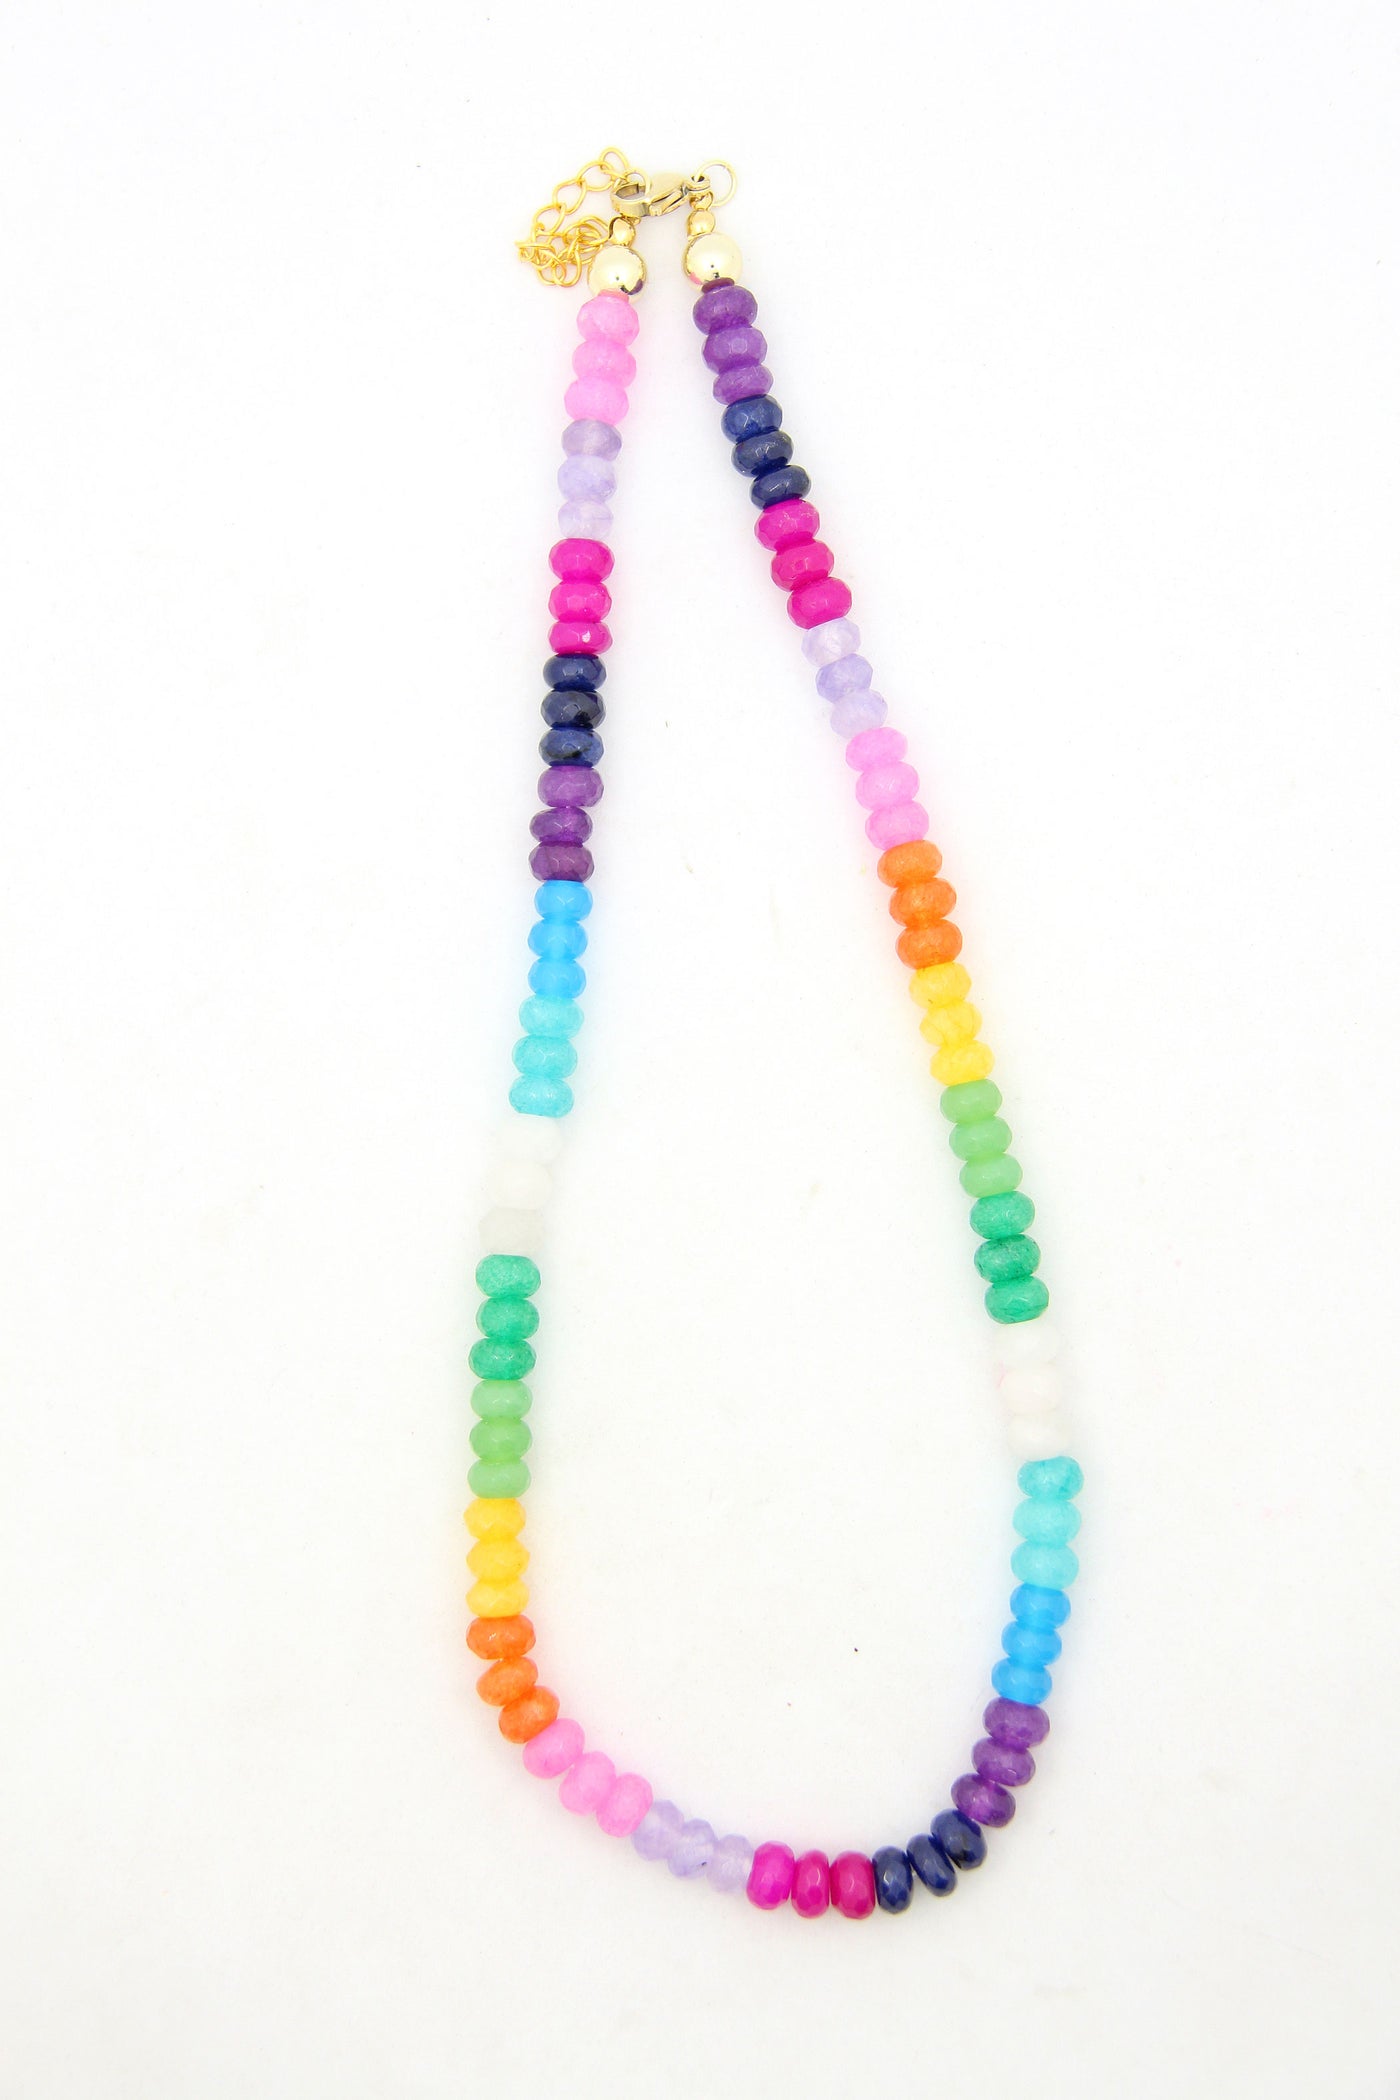 Dyed jade gradient ombre faceted necklace in pink, turquoise, green, purple